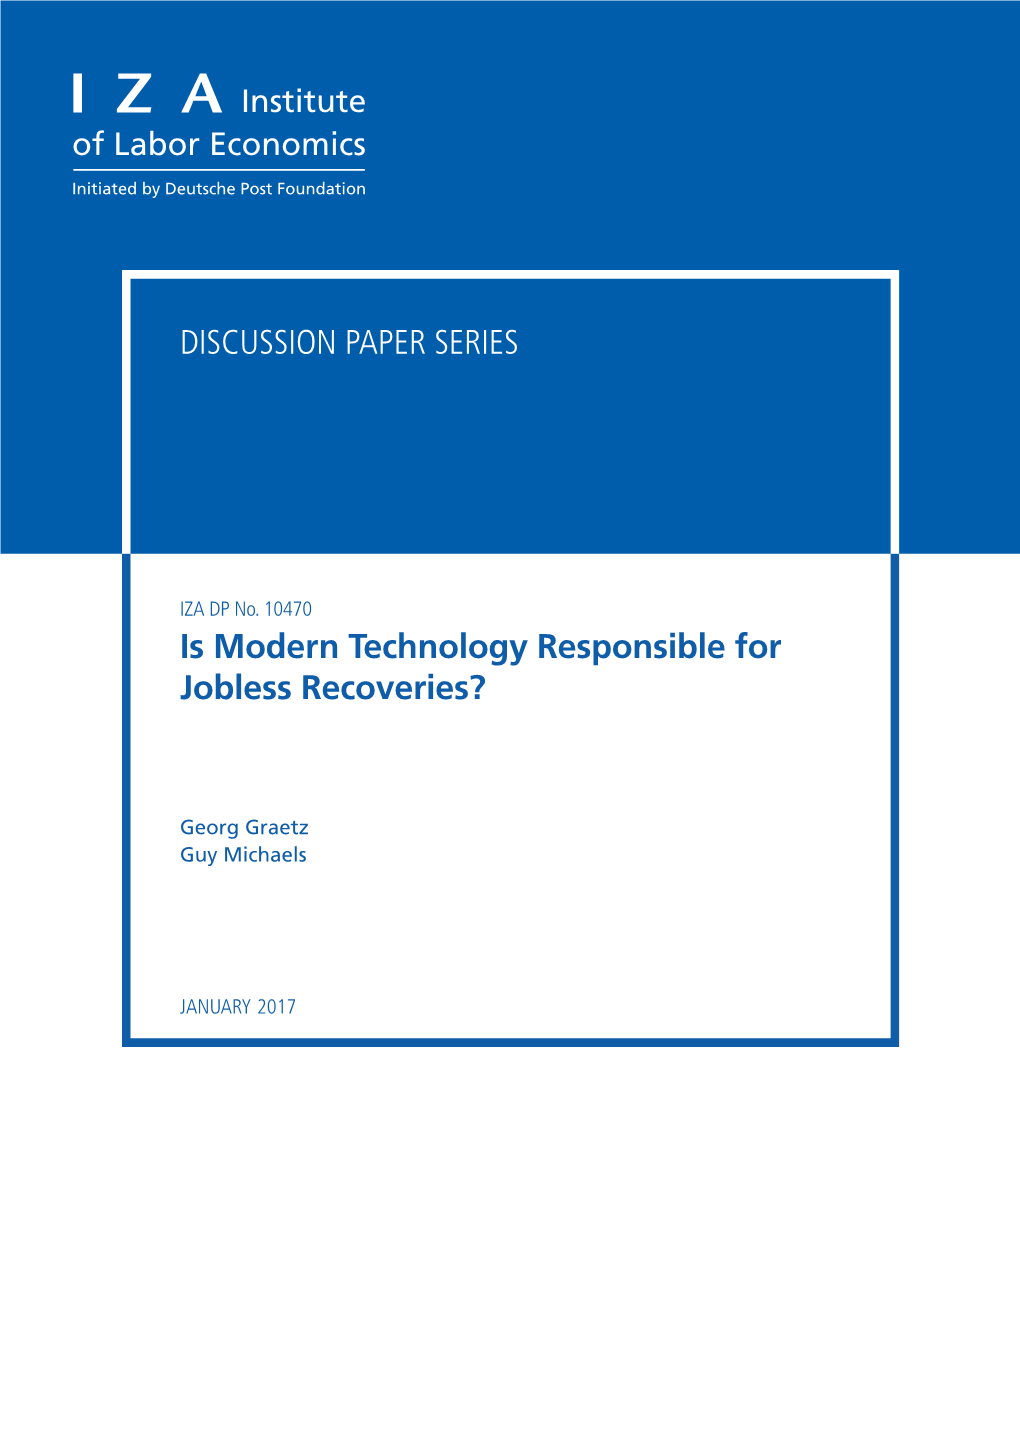 Is Modern Technology Responsible for Jobless Recoveries?